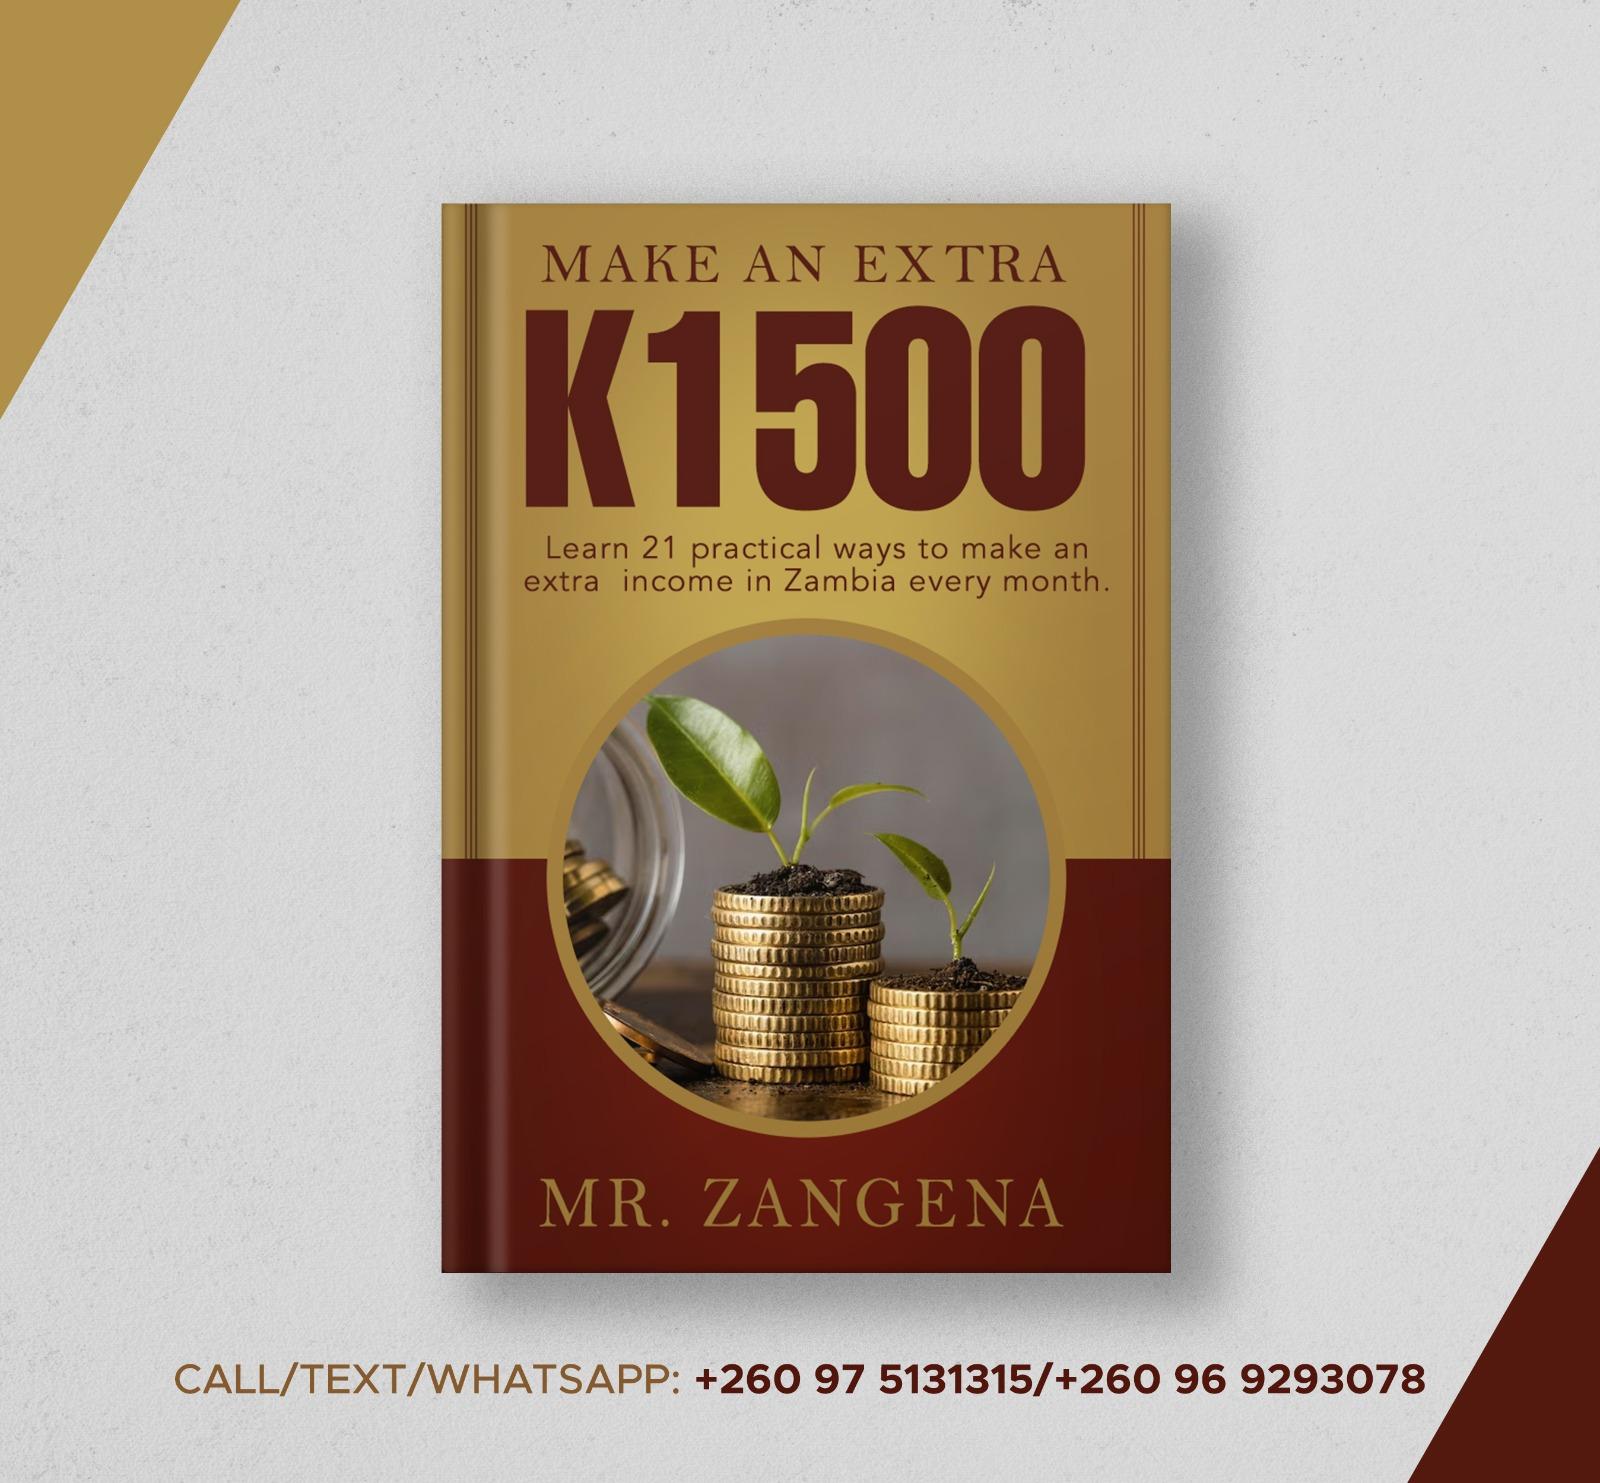 How to make an Extra K1,500 every month